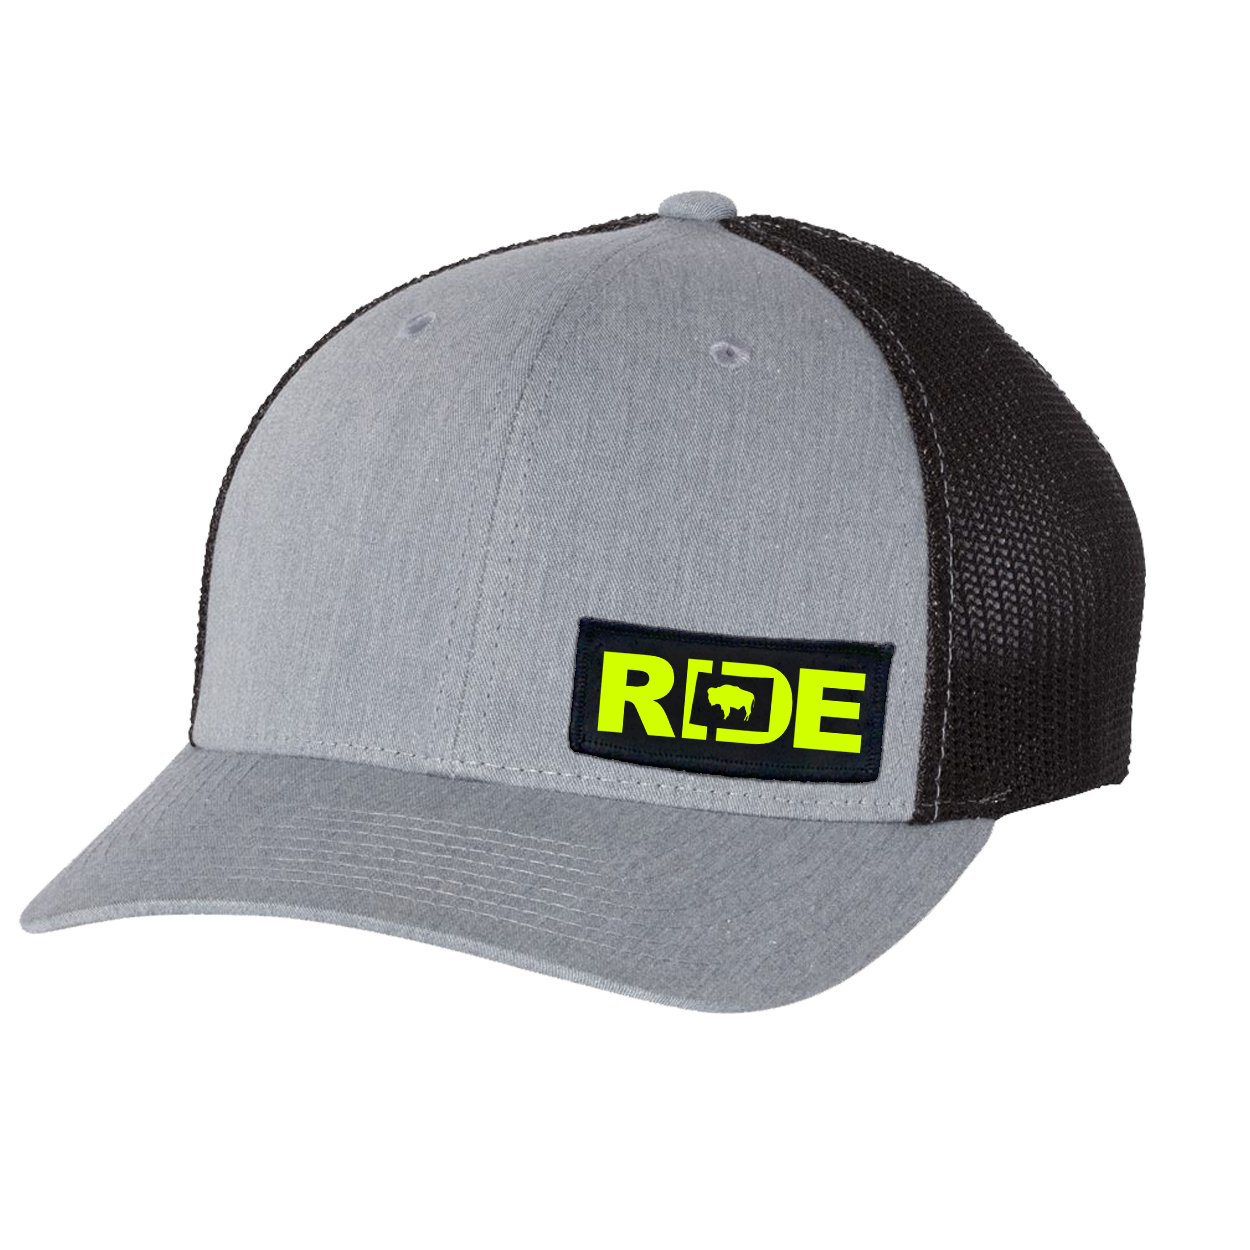 Ride Wyoming Night Out Woven Patch Flex-Fit Hat Heather Gray/Black (Hi-Vis Logo)